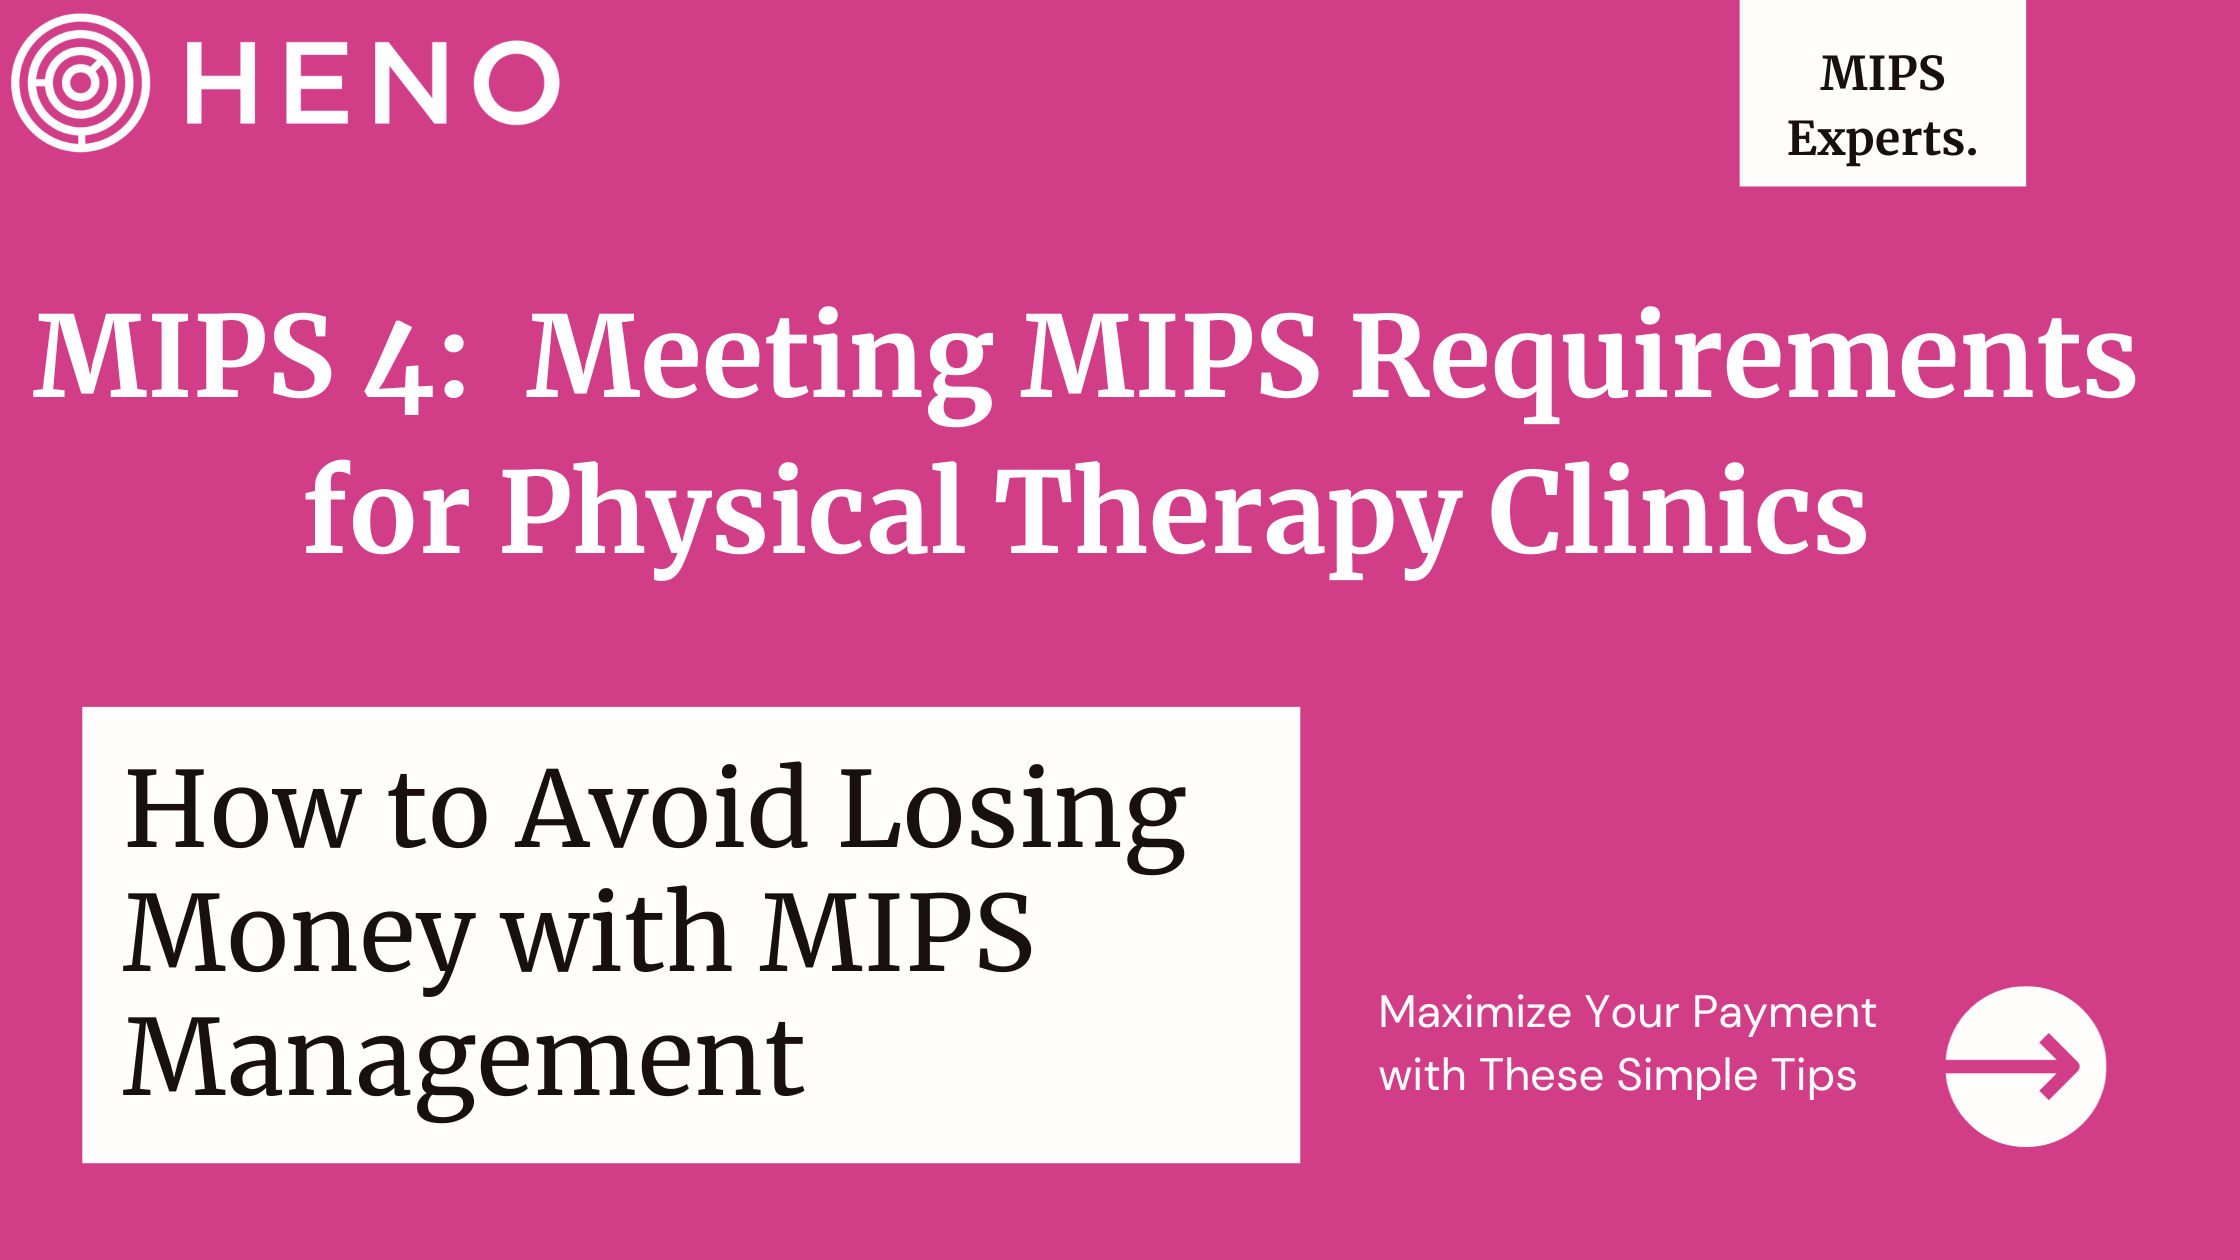 Meeting MIPS Requirements for Physical Therapy Clinics